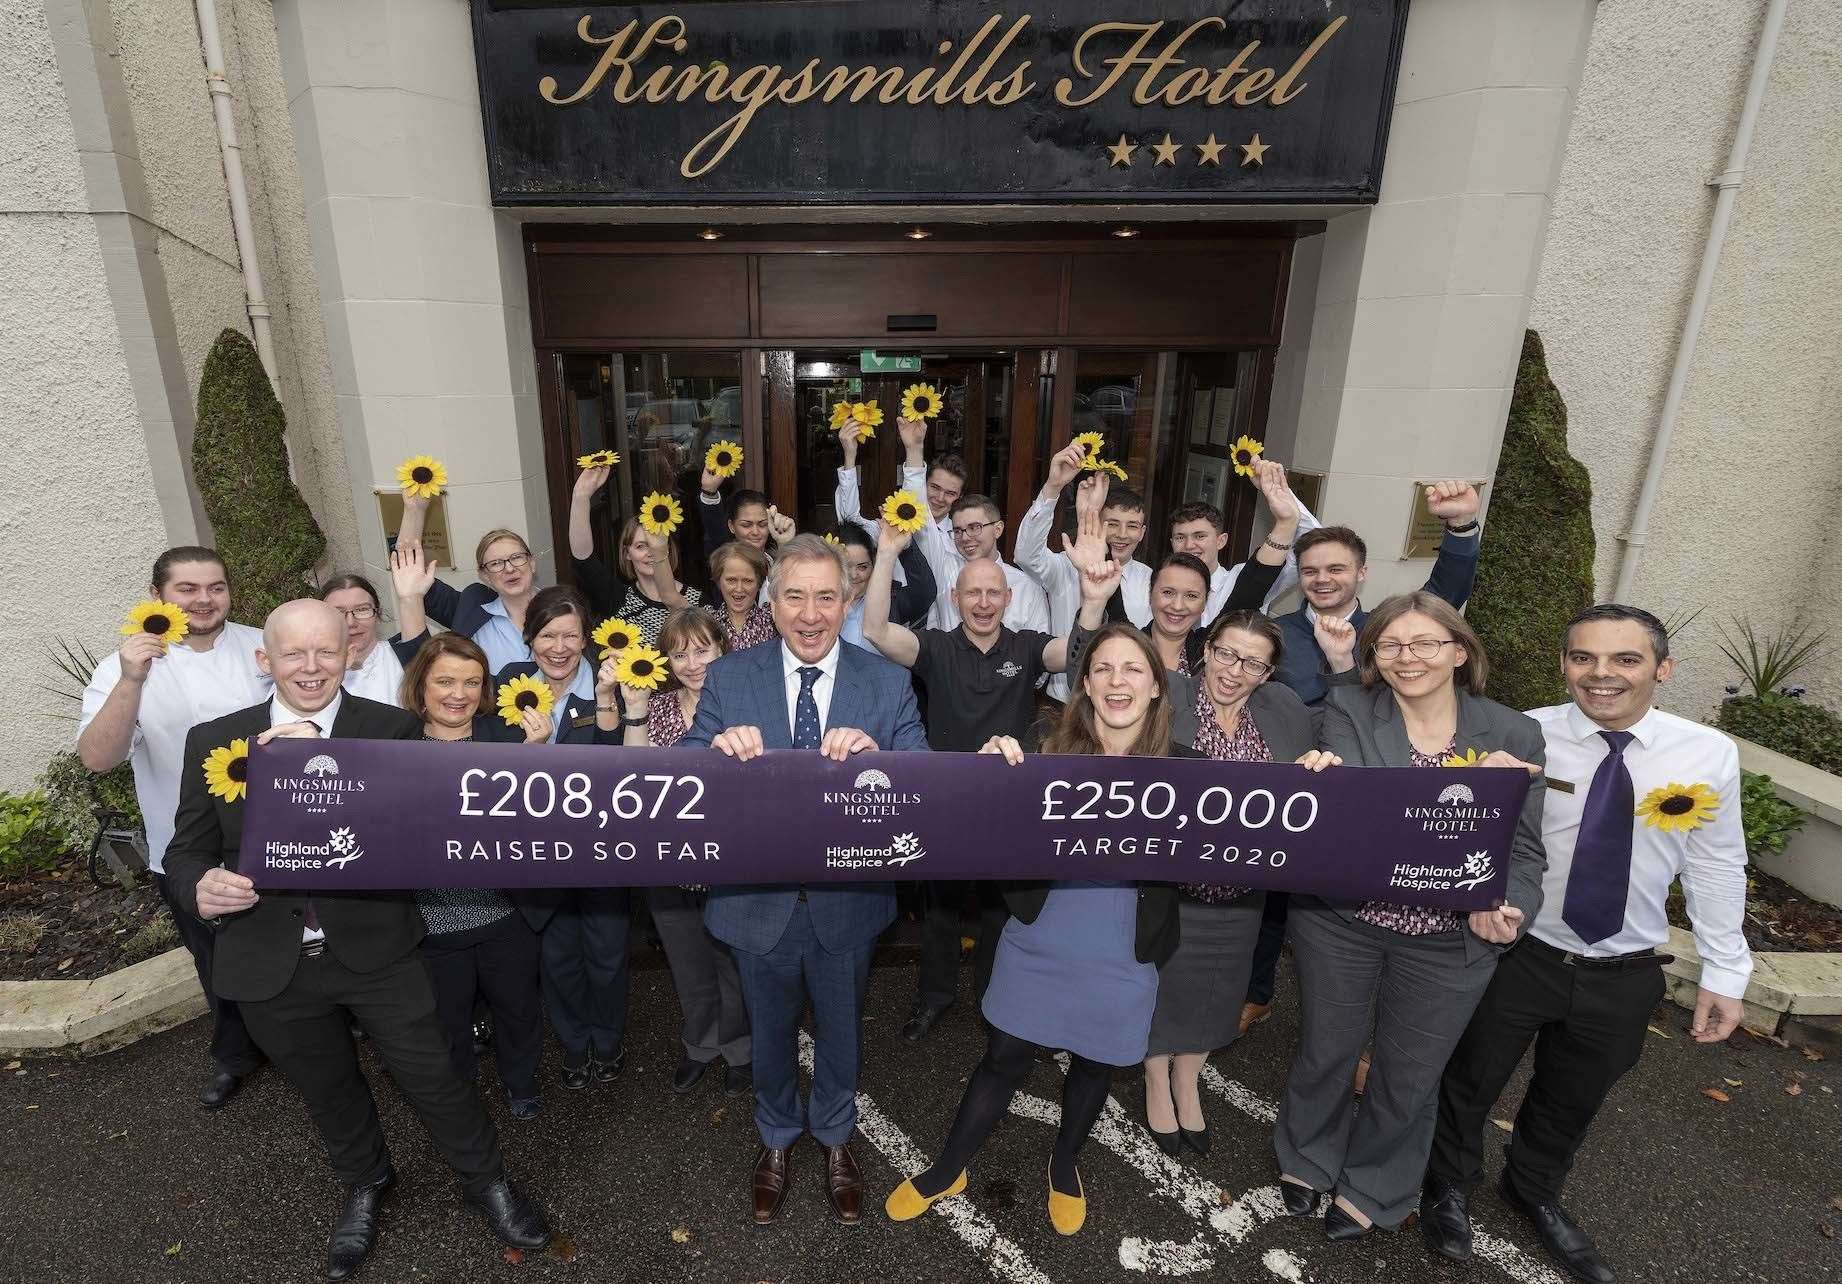 Kingsmills Hotel Group staff, including chief executive Tony Story (centre) celebrate supporting Highland Hospice.